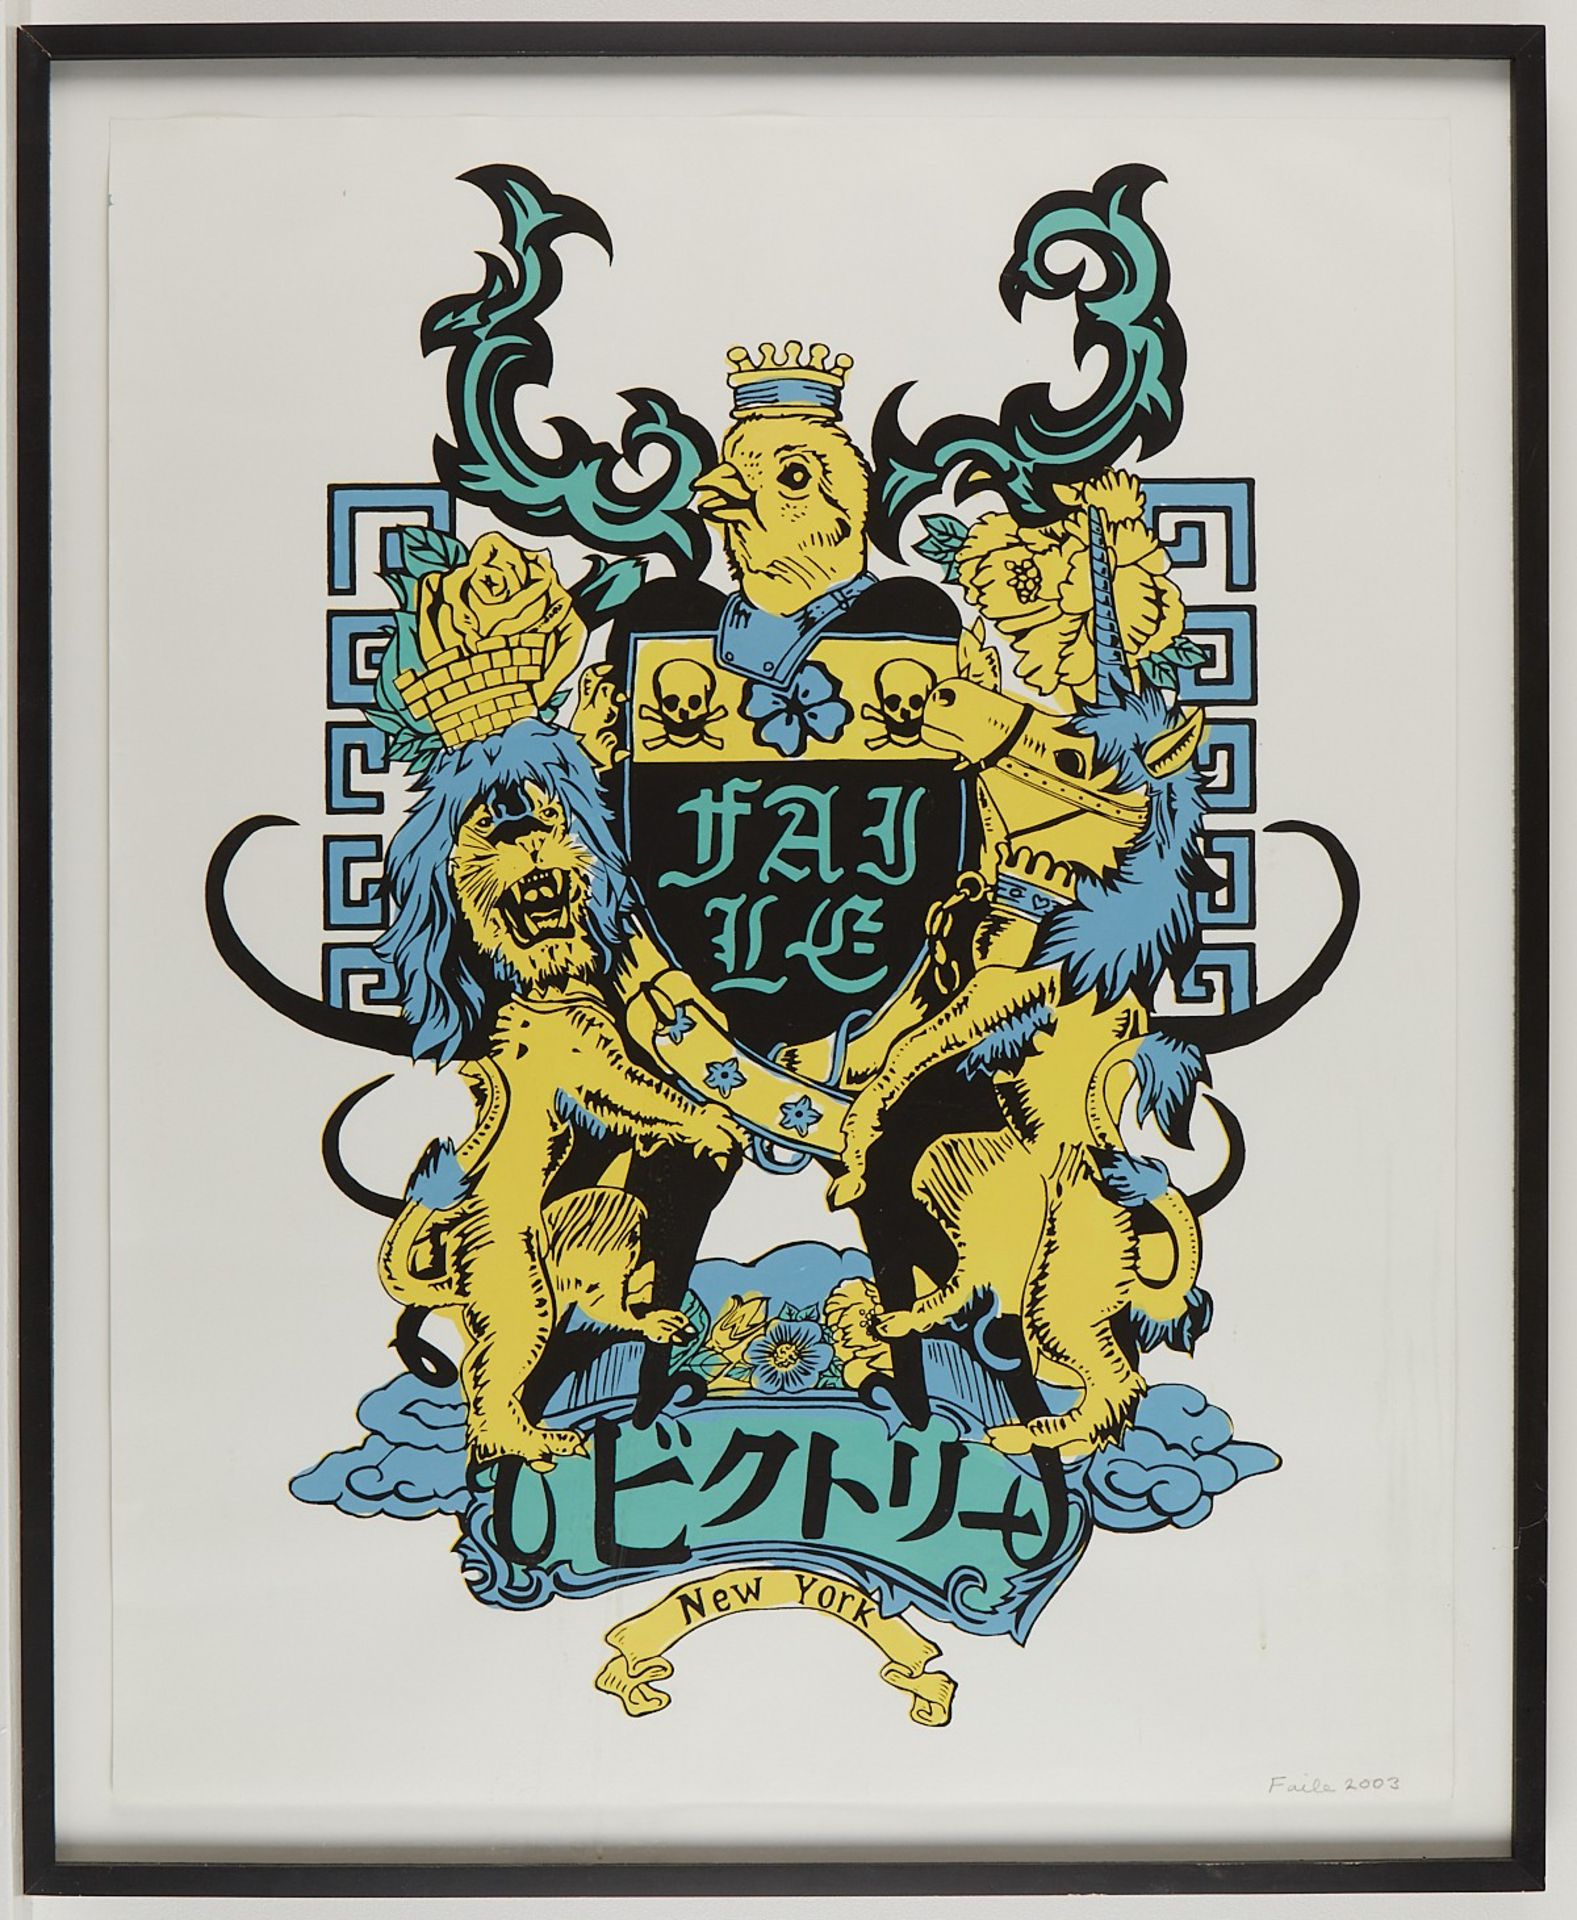 FAILE New York Coat of Arms Serigraph 2003 - Image 3 of 5